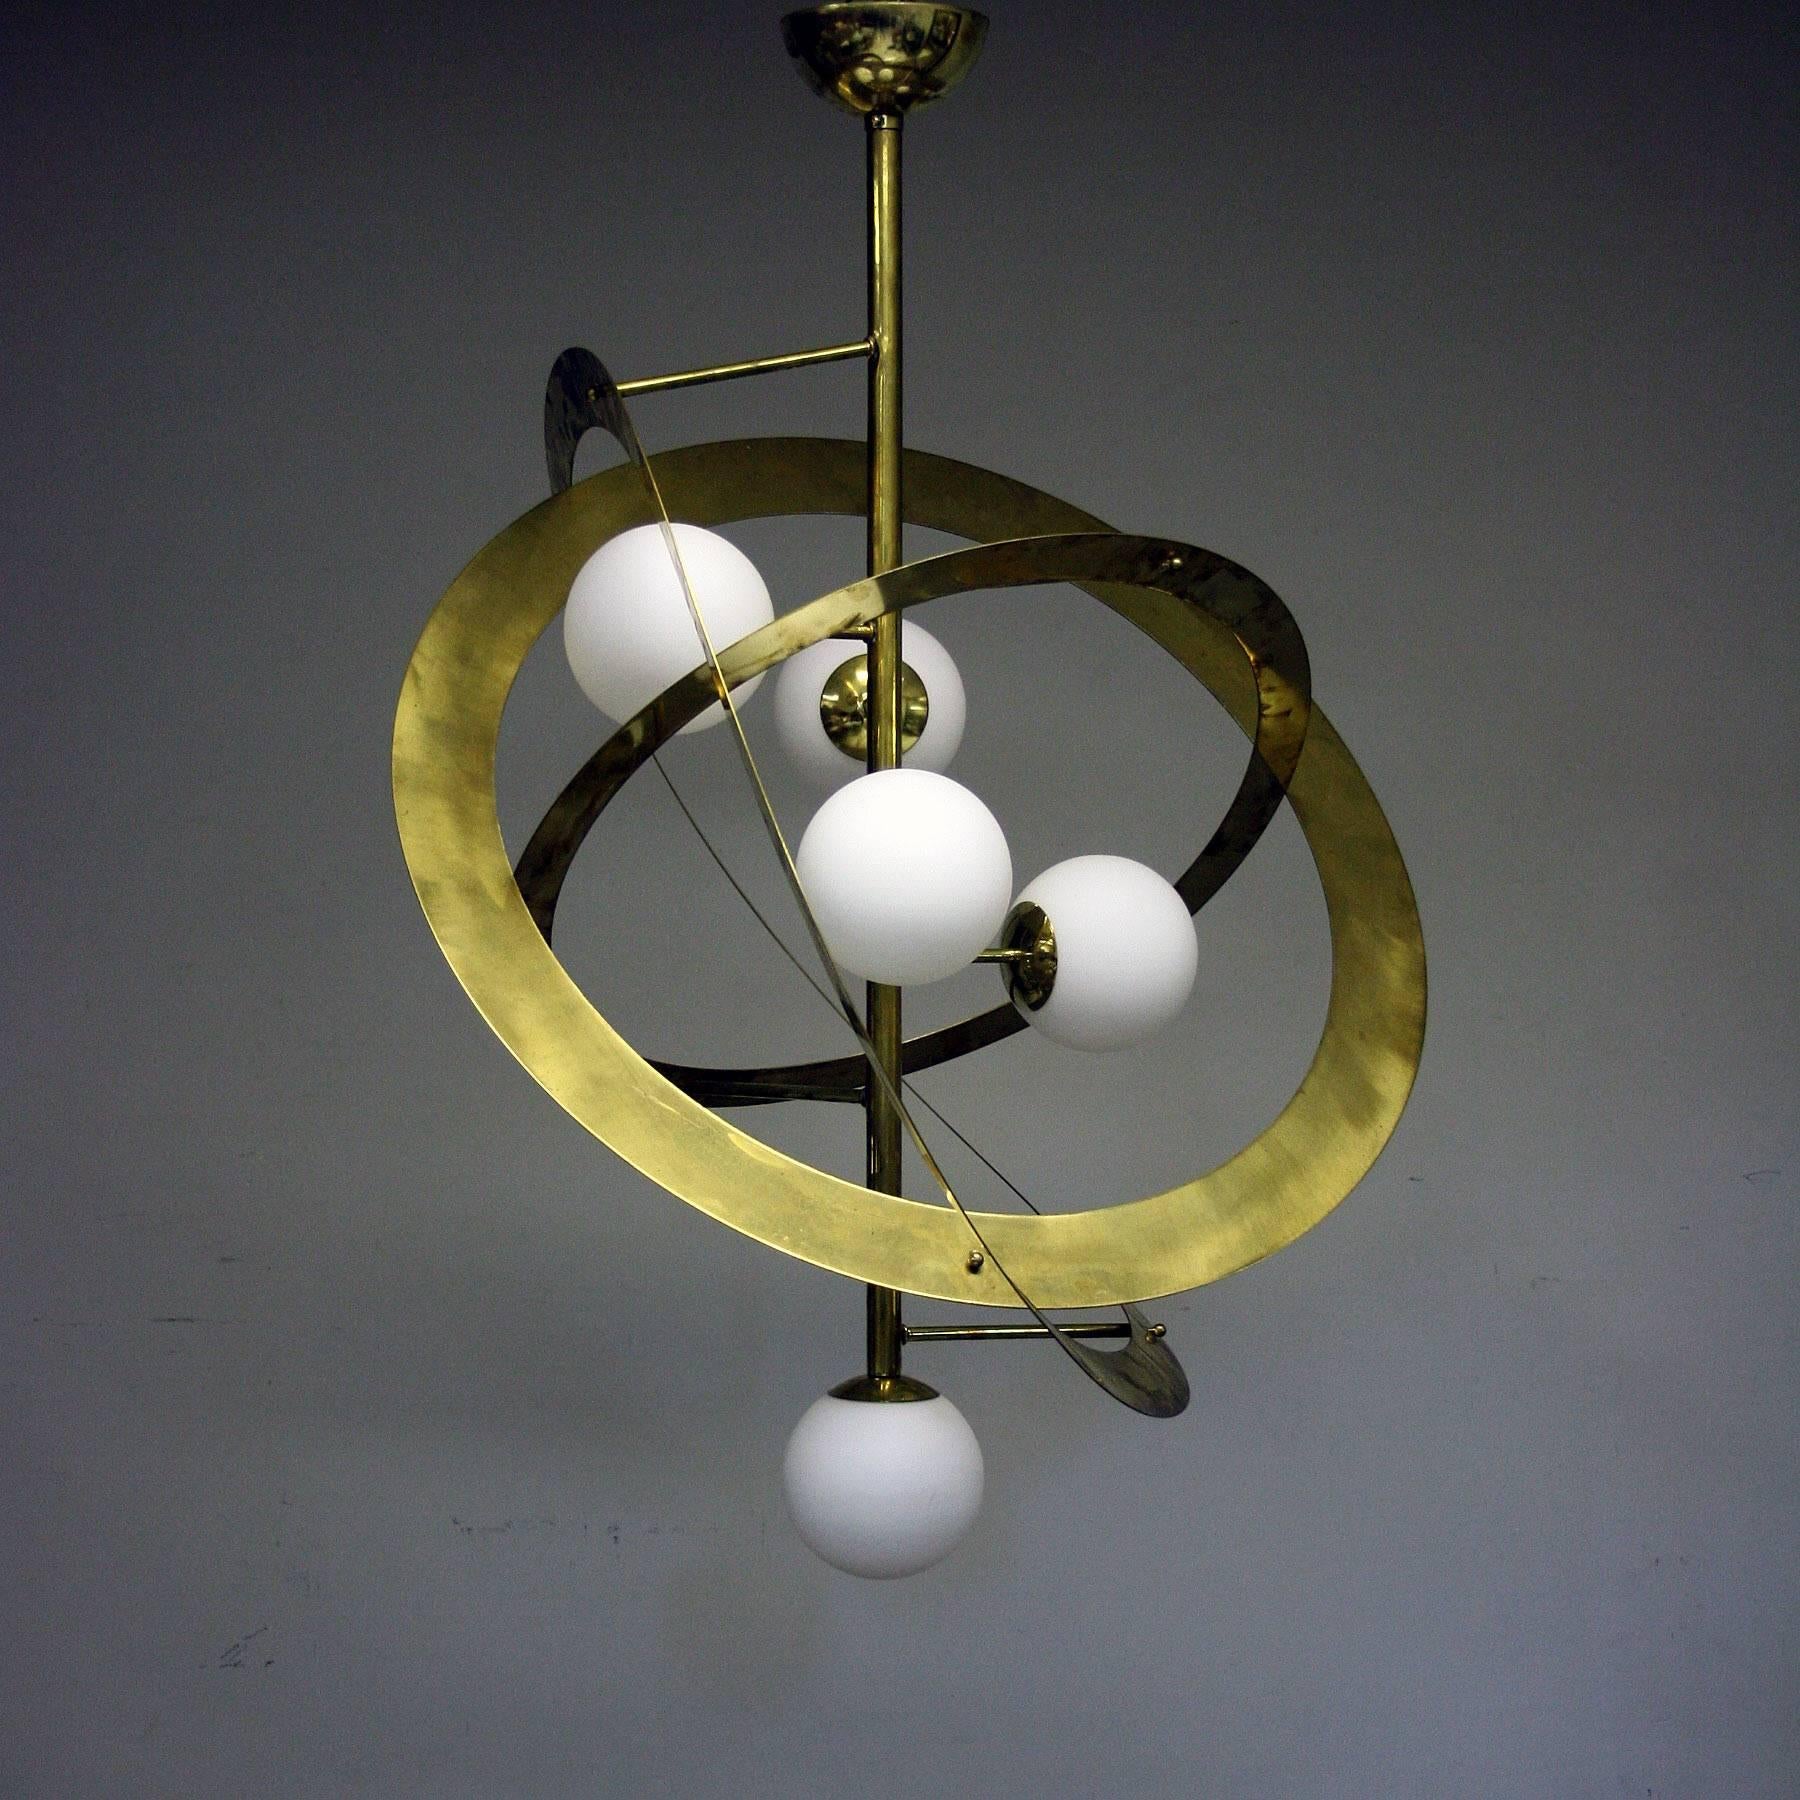 You can now sit in your lounge and look up at the solar system with this handcrafted Bespoke Italian brass chandelier with five frosted glass balls in the manor of the solar system, this really is a statement light and would be the talking point of